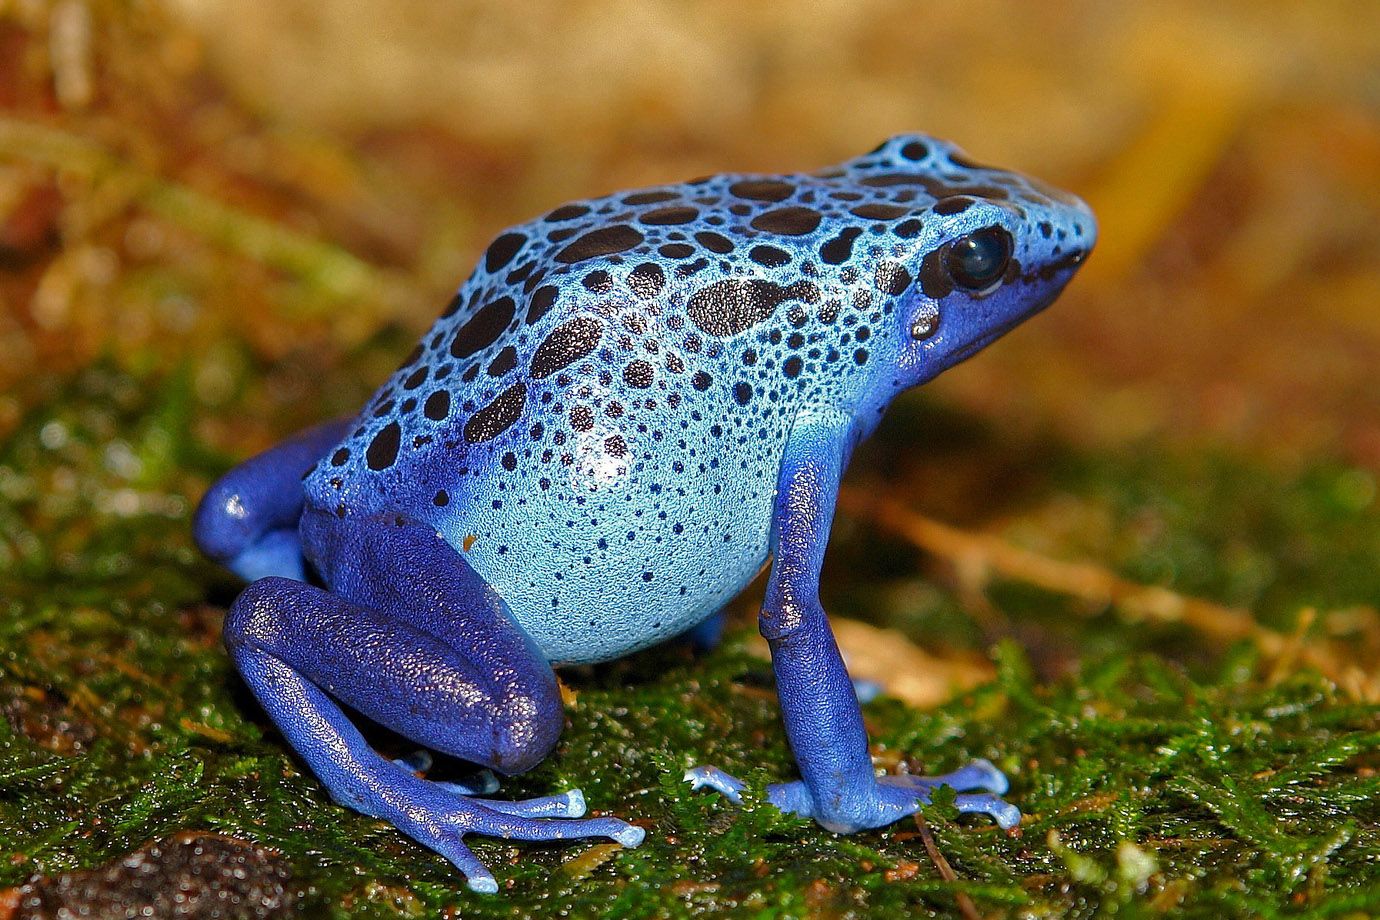 Blue Poison Dart Frog - the name fits better for this frog as for each other blue animal.